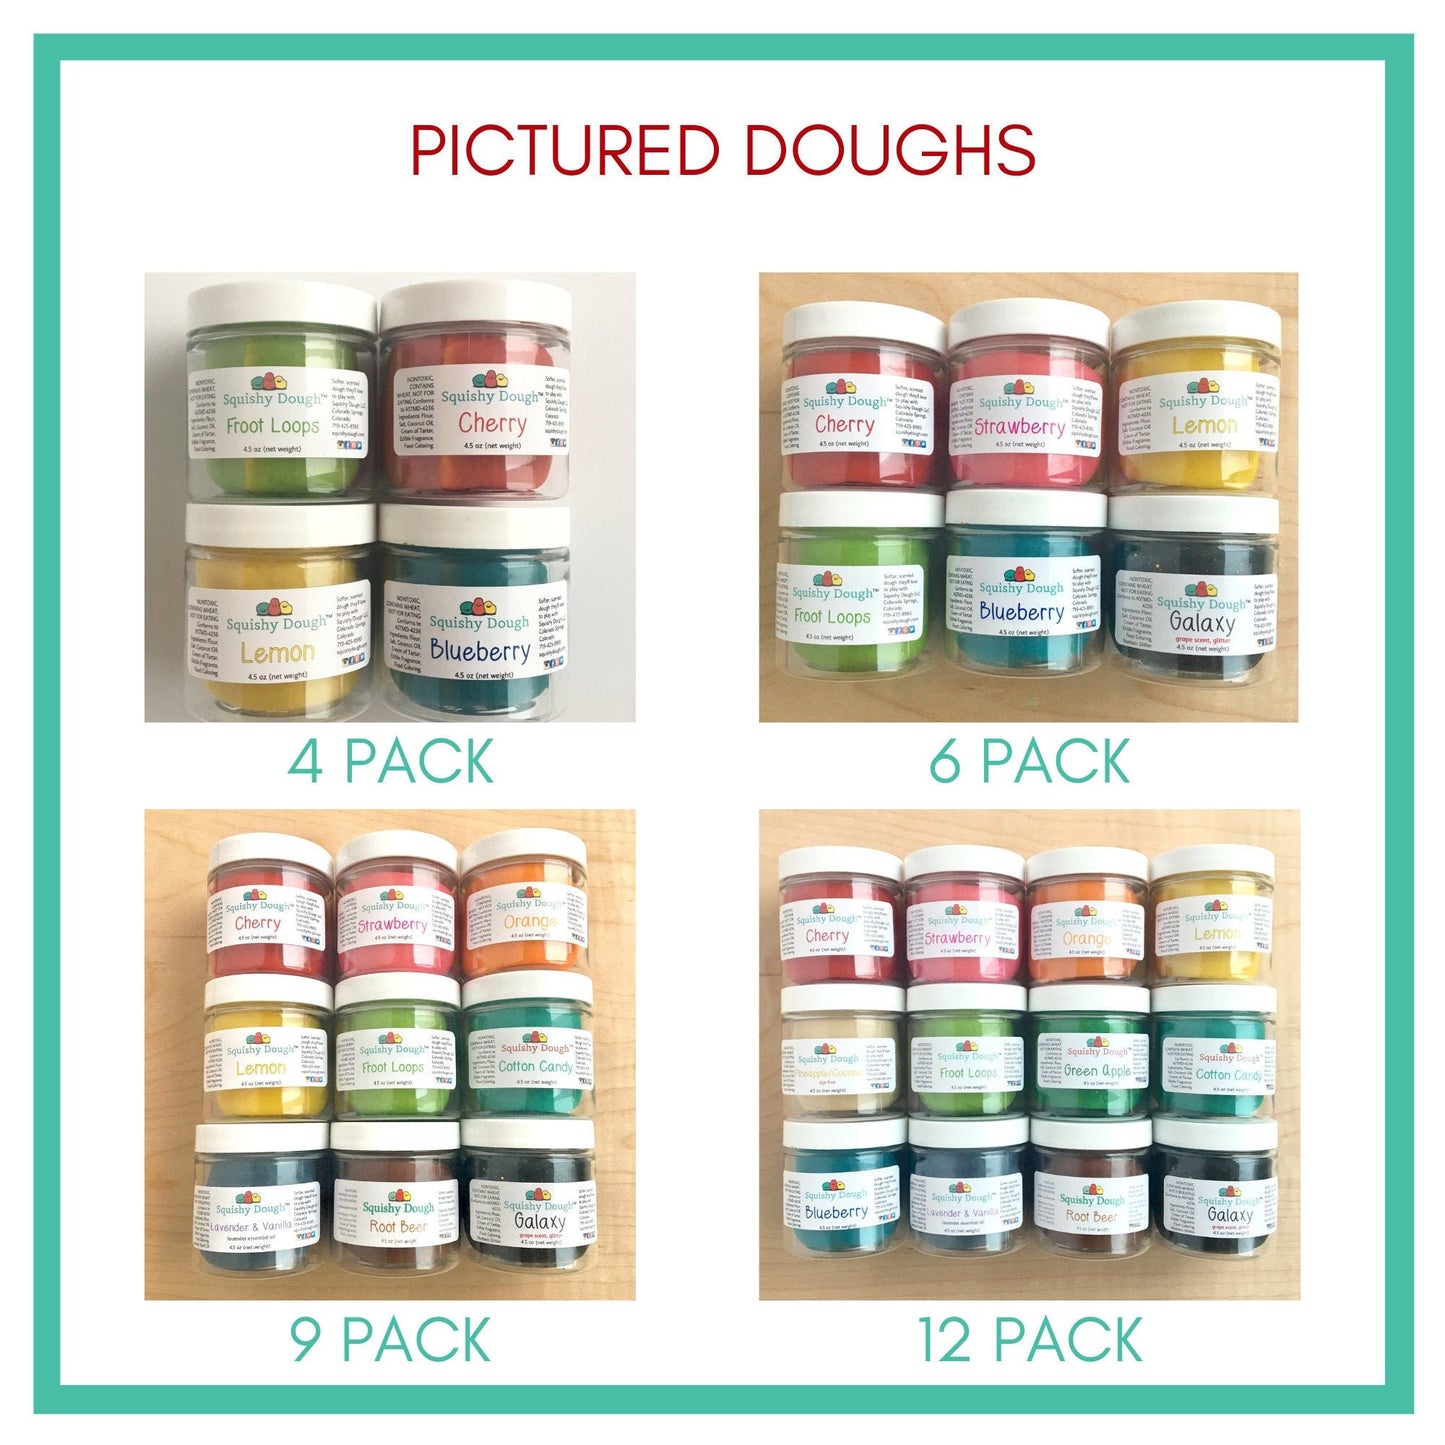 pictured doughs 4, 6, 9, 12 custom pack